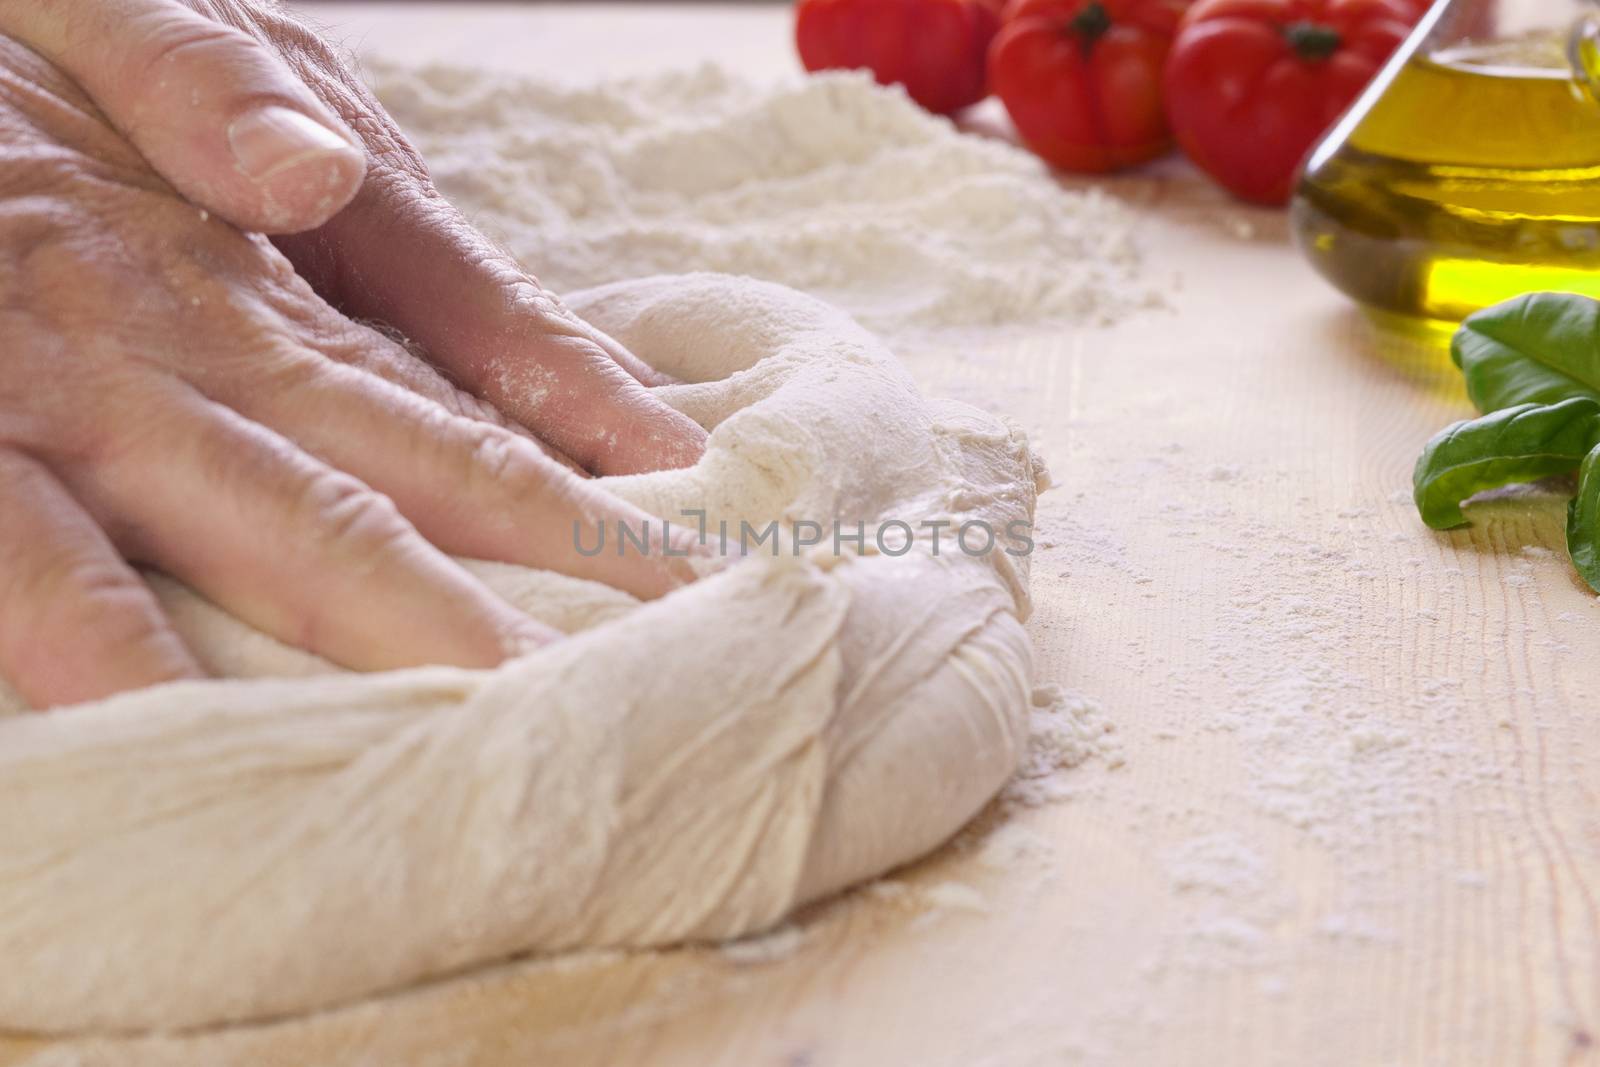 Macro close up of man chef hands kneading pizza dough on wooden worktop and flour, extra virgin oil, tomatoes and basil in the background by robbyfontanesi